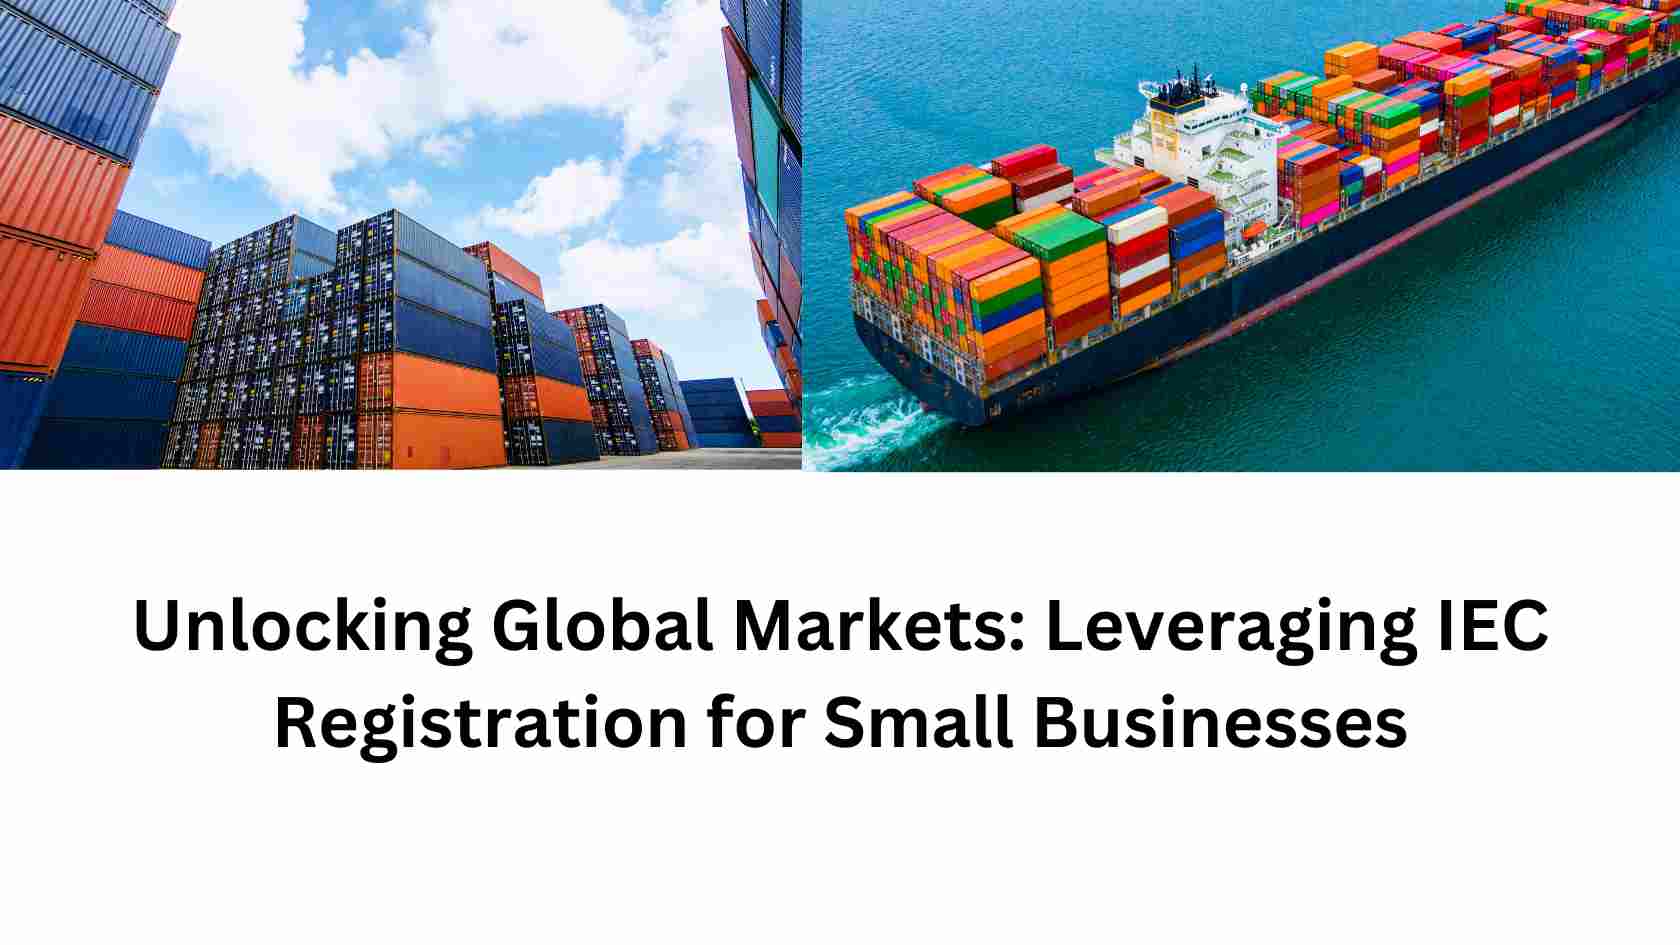 Unlocking Global Markets: Leveraging IEC Registration for Small Businesses